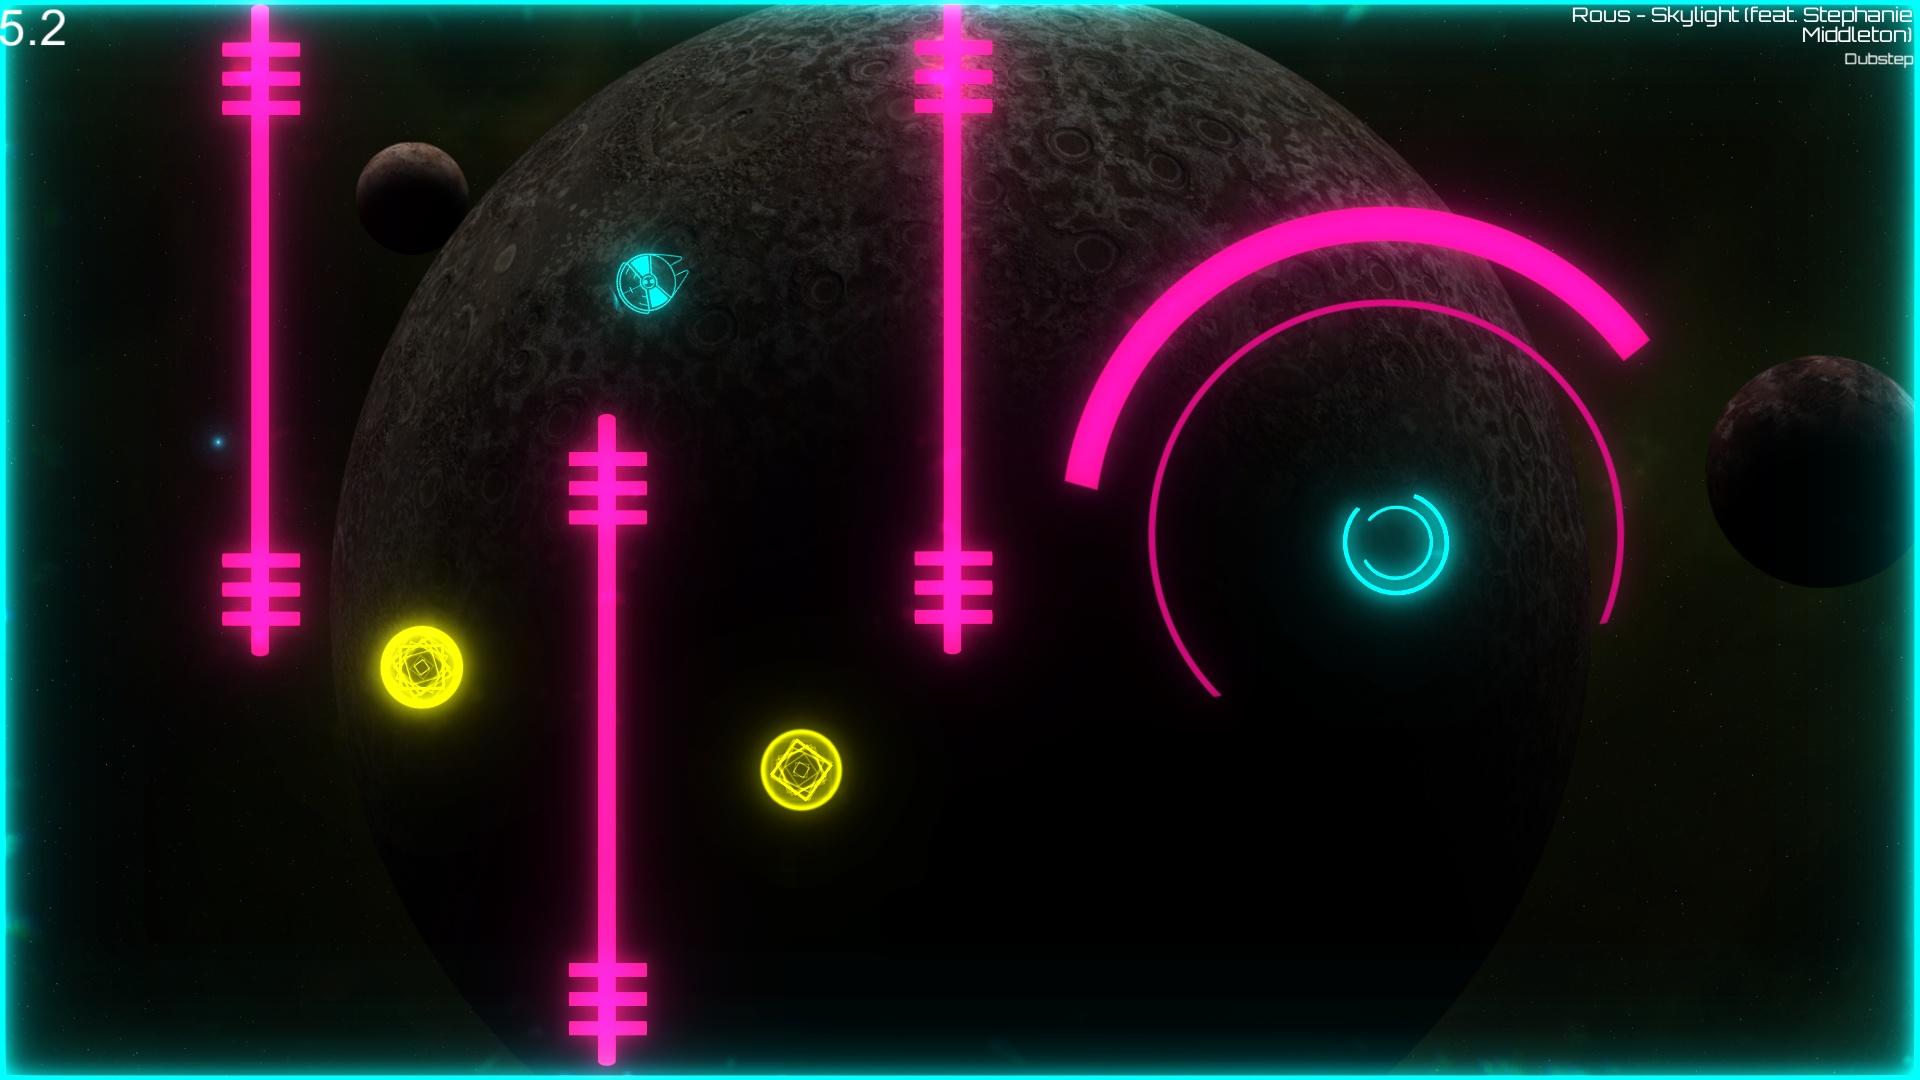 Screenshot №4 from game Neon Space 2